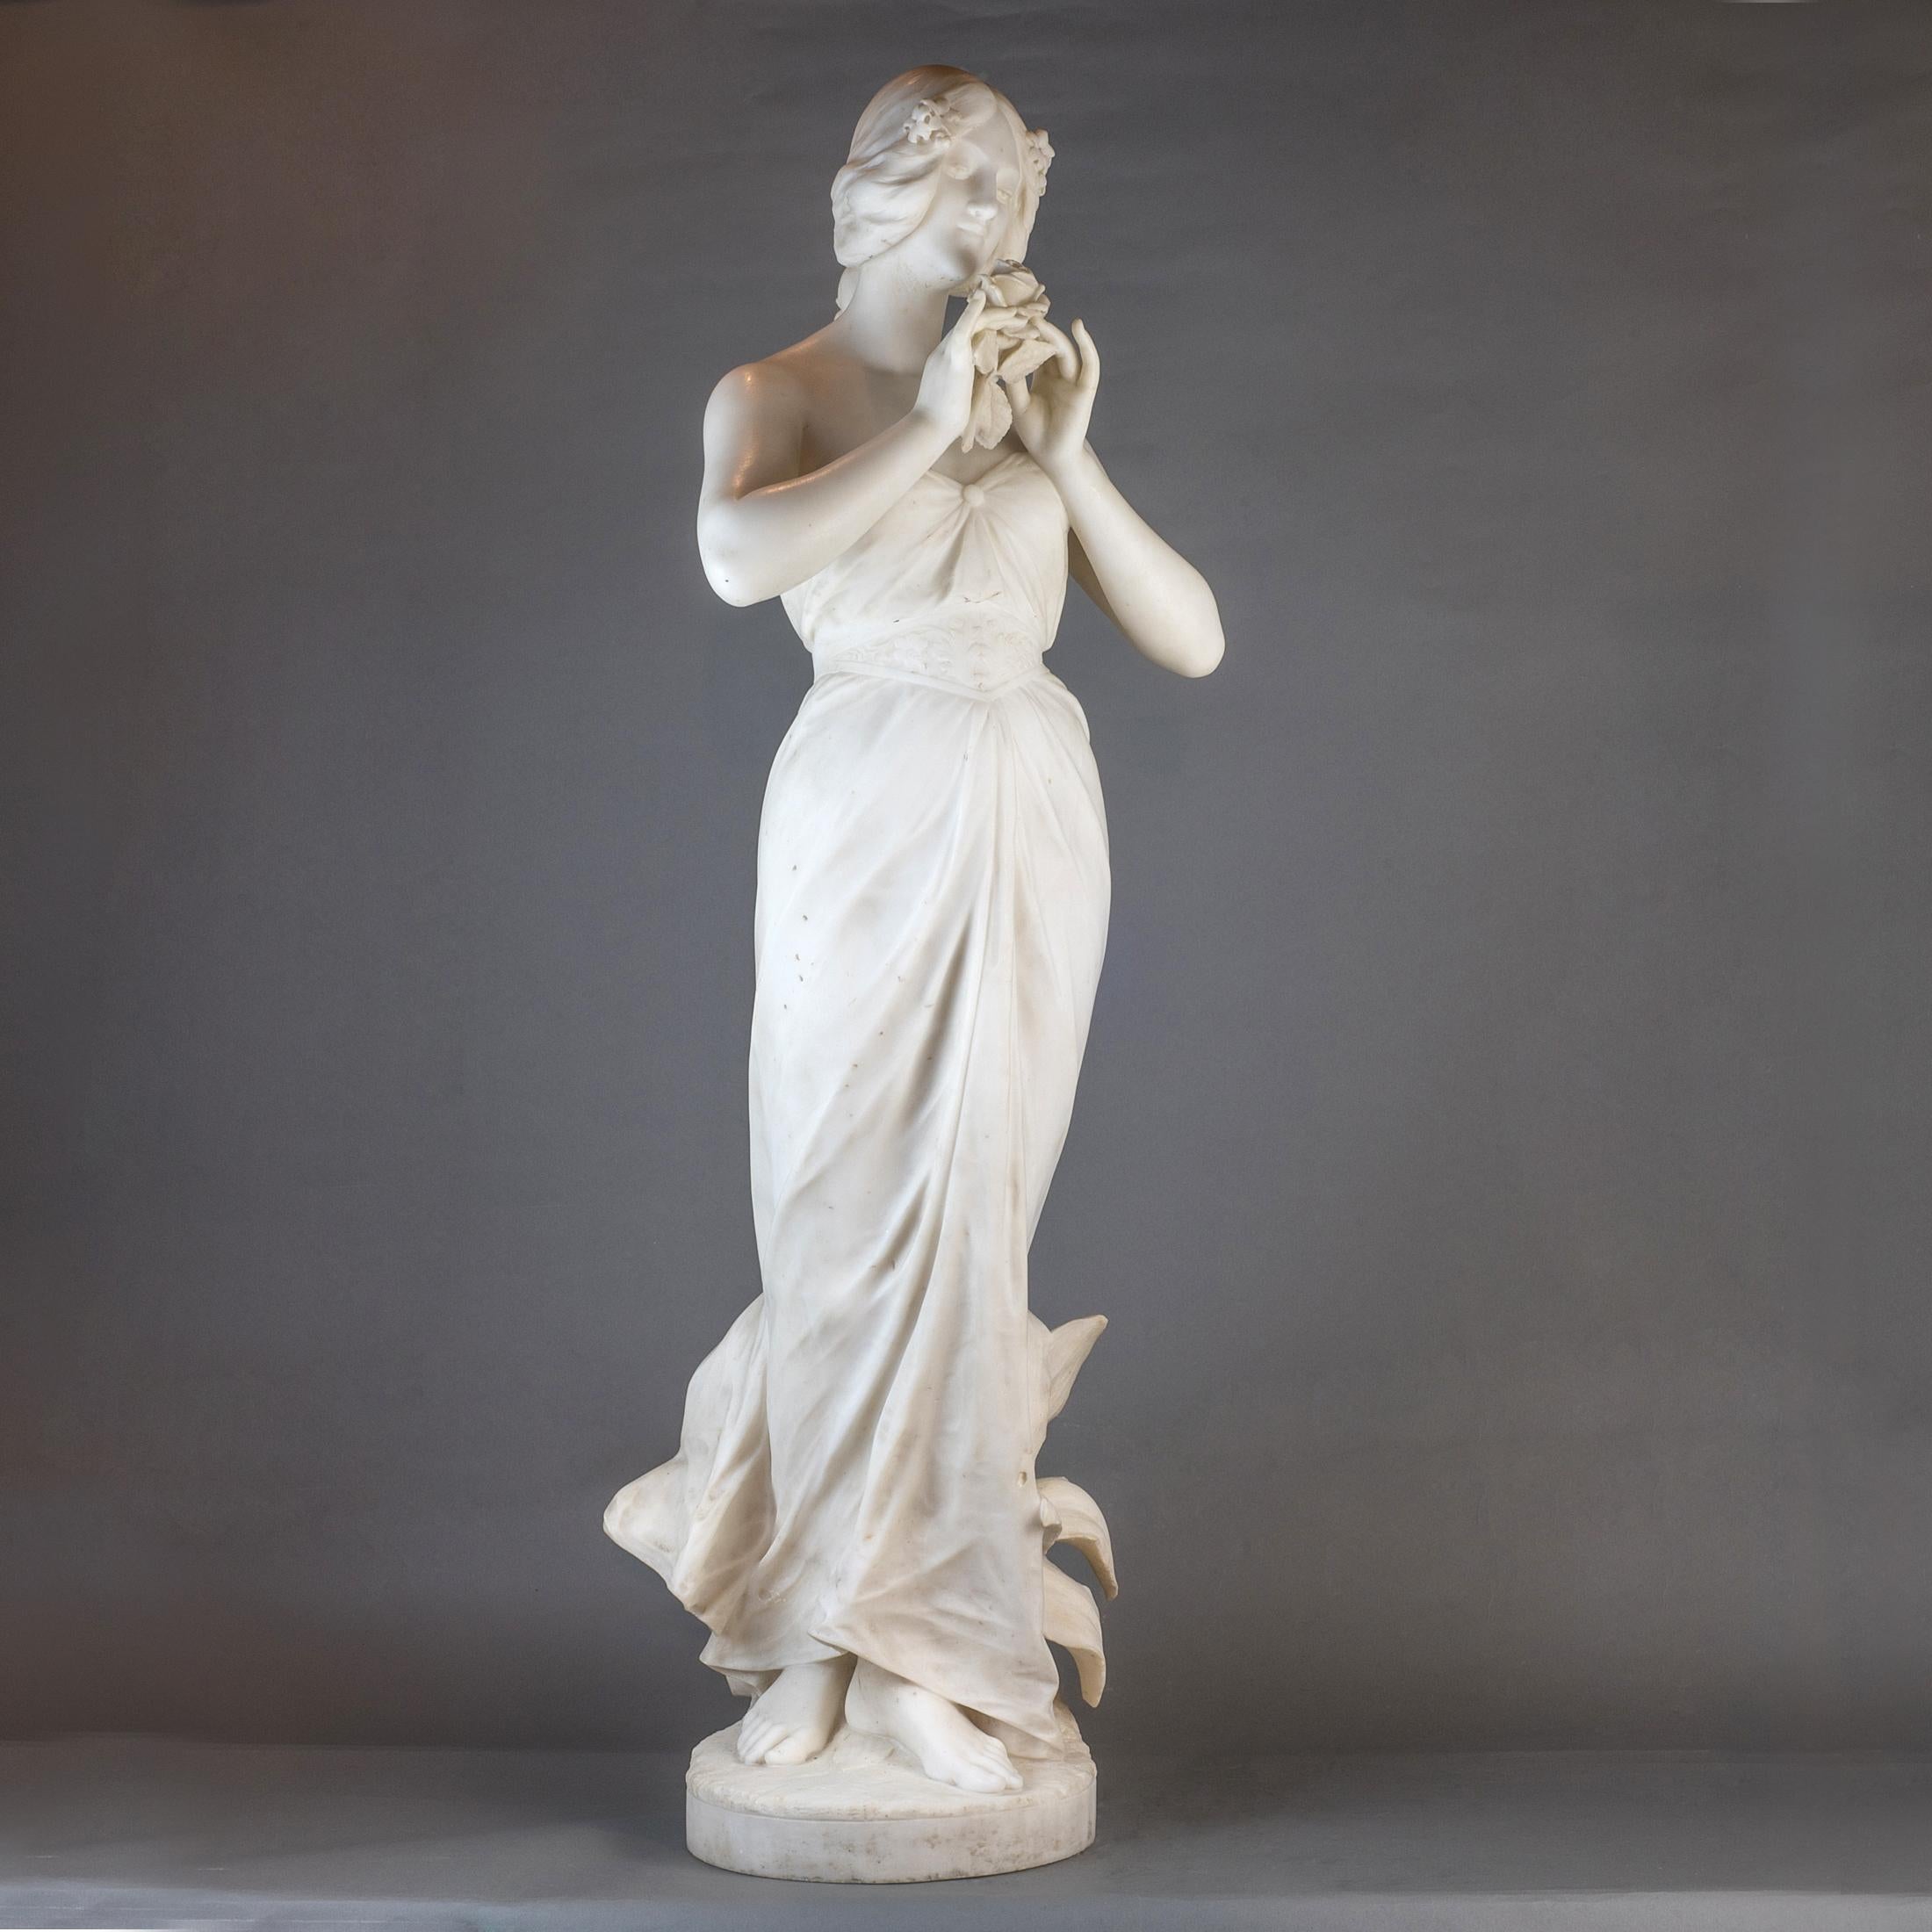 Fine quality Italian carrara marble statue of a young beauty holding a rose. Signed ‘G. GAMBOGI, FIRENZE’

Maker: Giuseppe Gambogi (Italian, 1862-1938)
Date: 19th century
Dimension: 42 1/4 in. x 13 1/2 in. x 11 in.